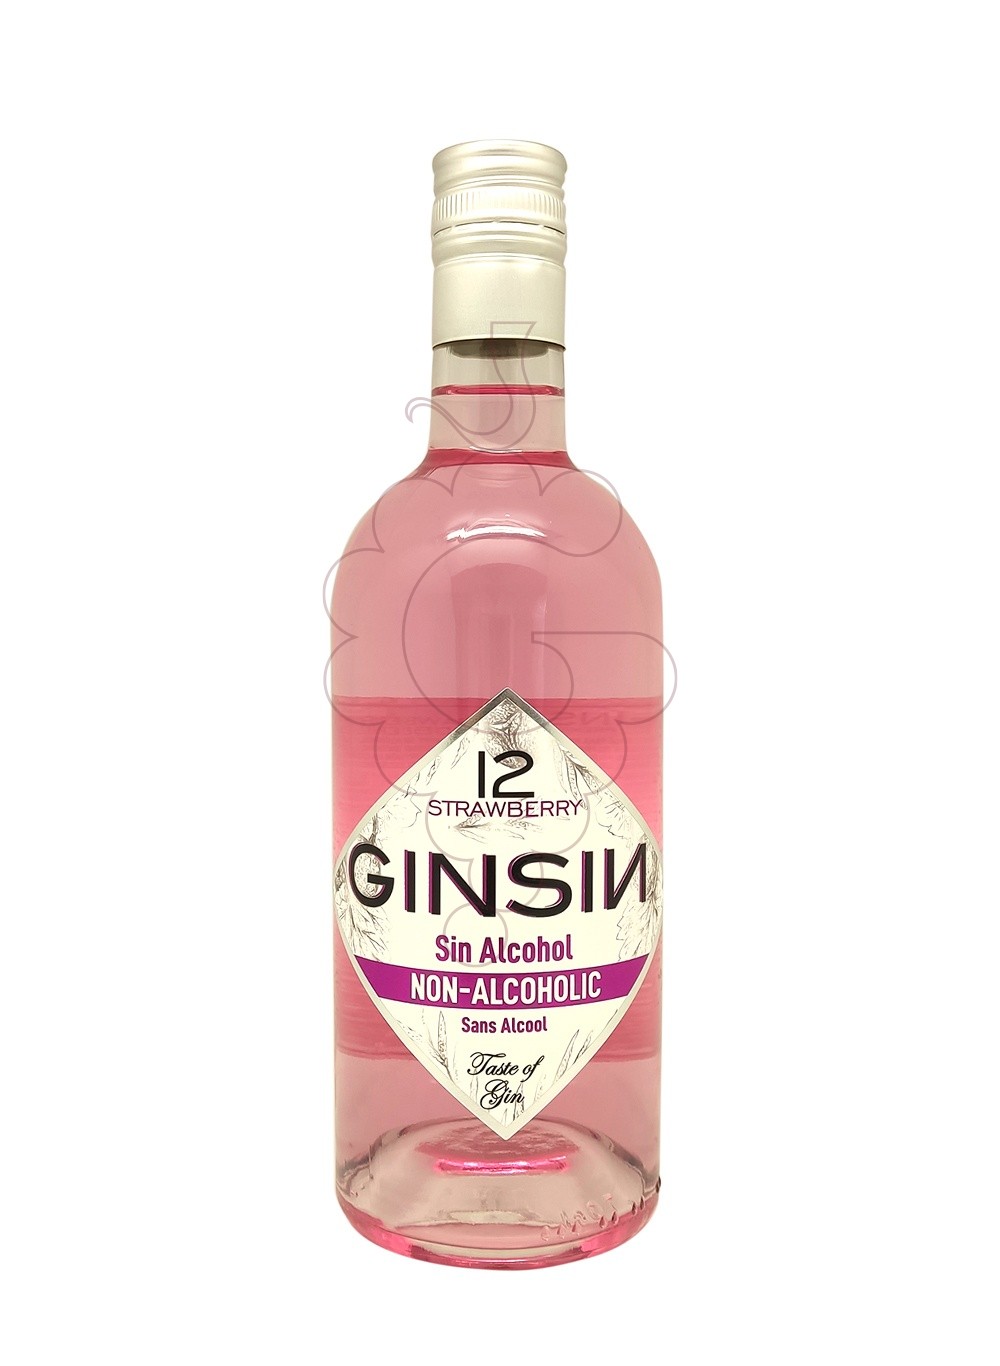 Foto Altres Ginsin Strawberry (s/alcohol)